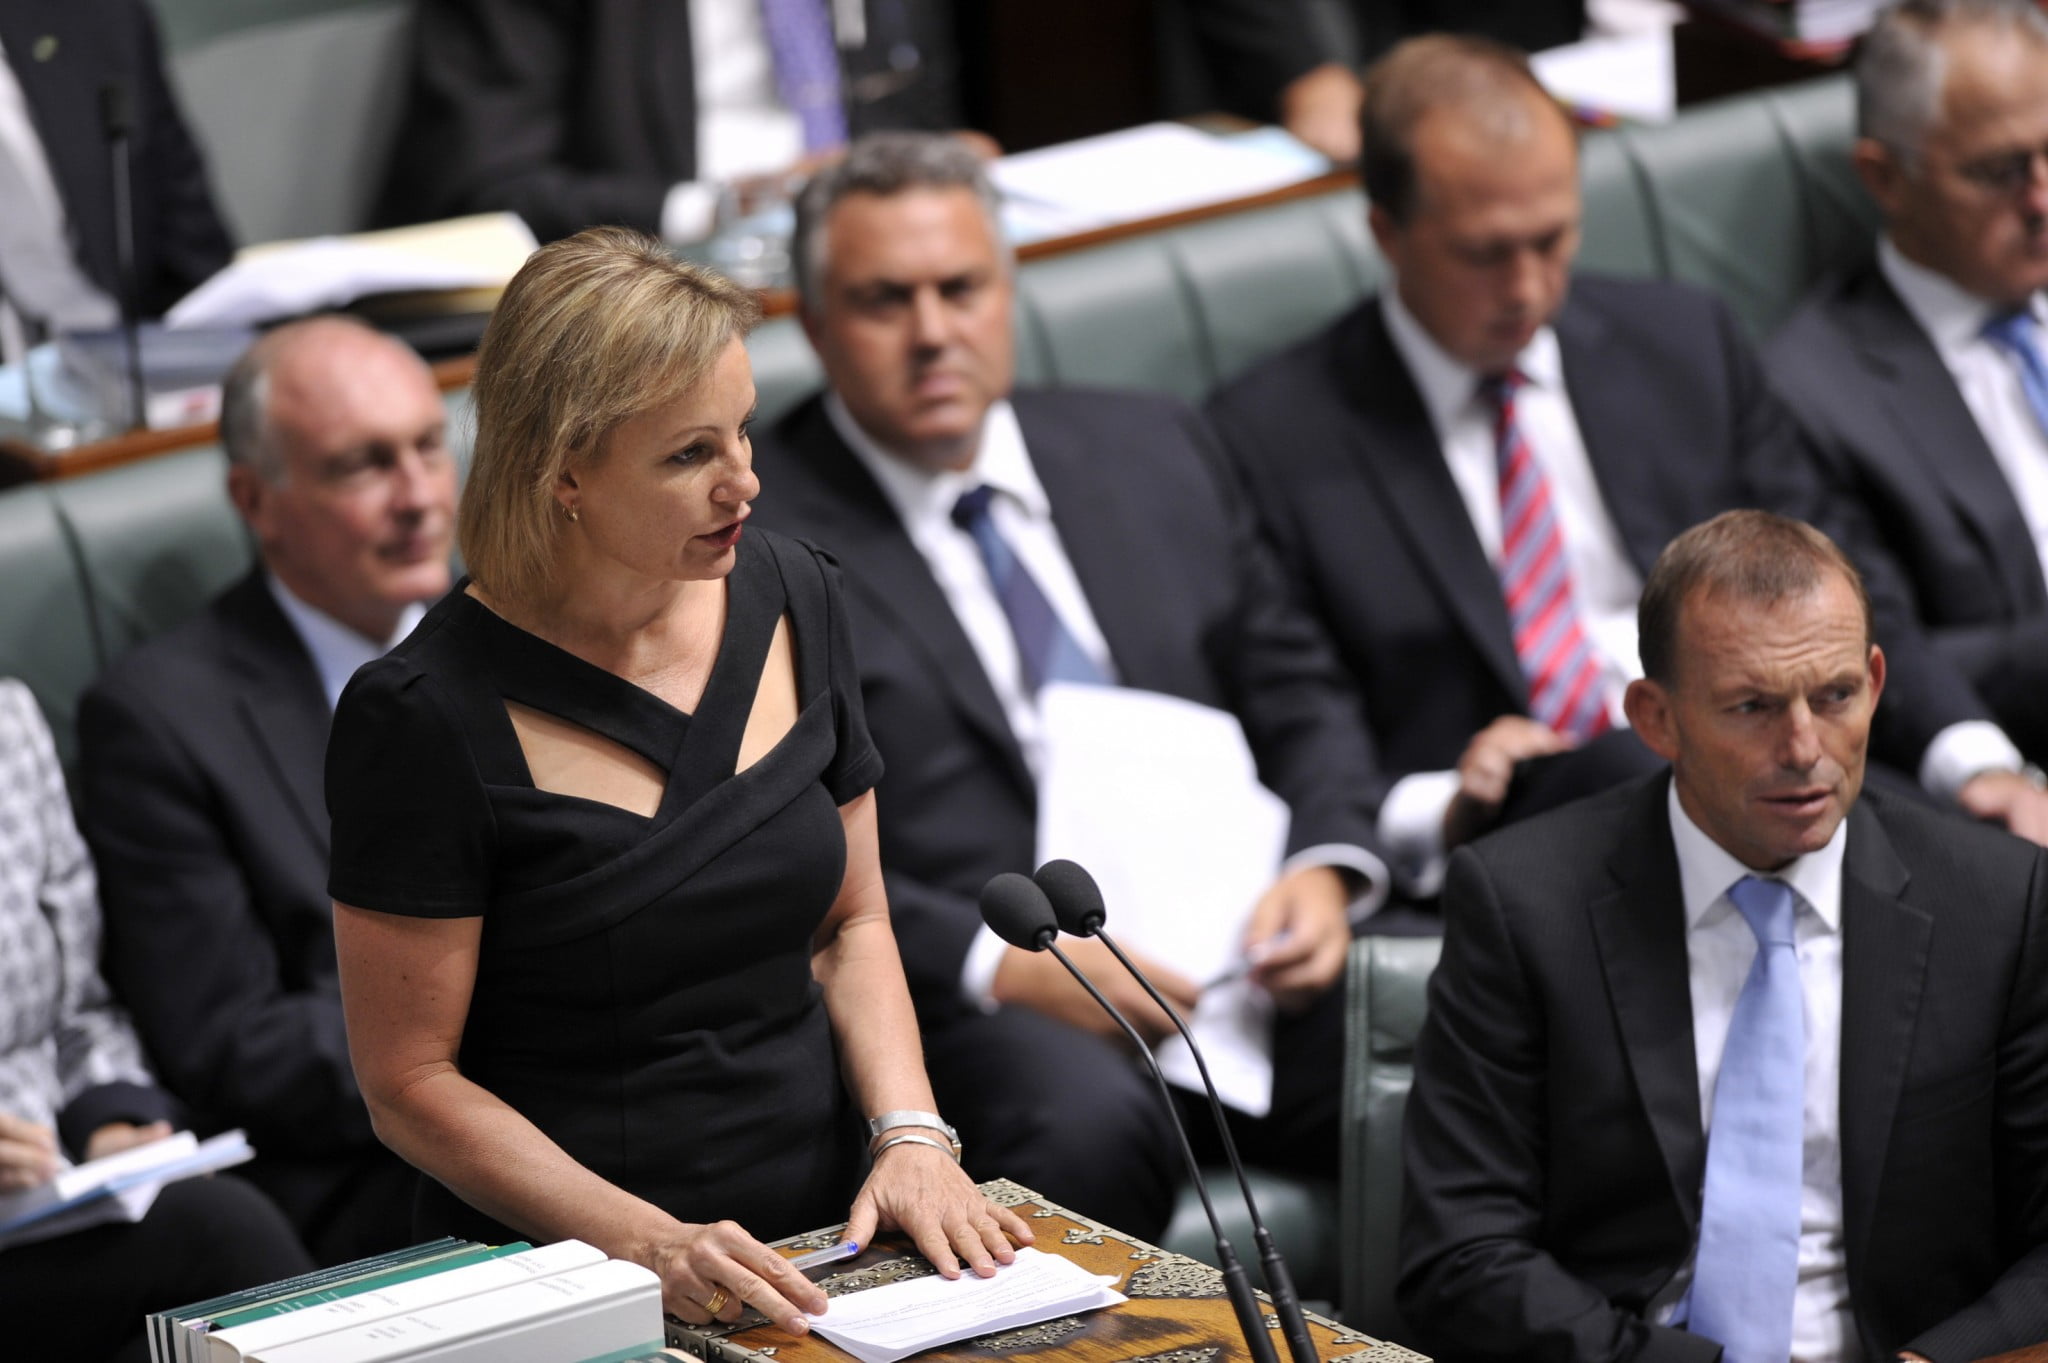 Pharmacy story: Sussan ley in parliament (in opposition)